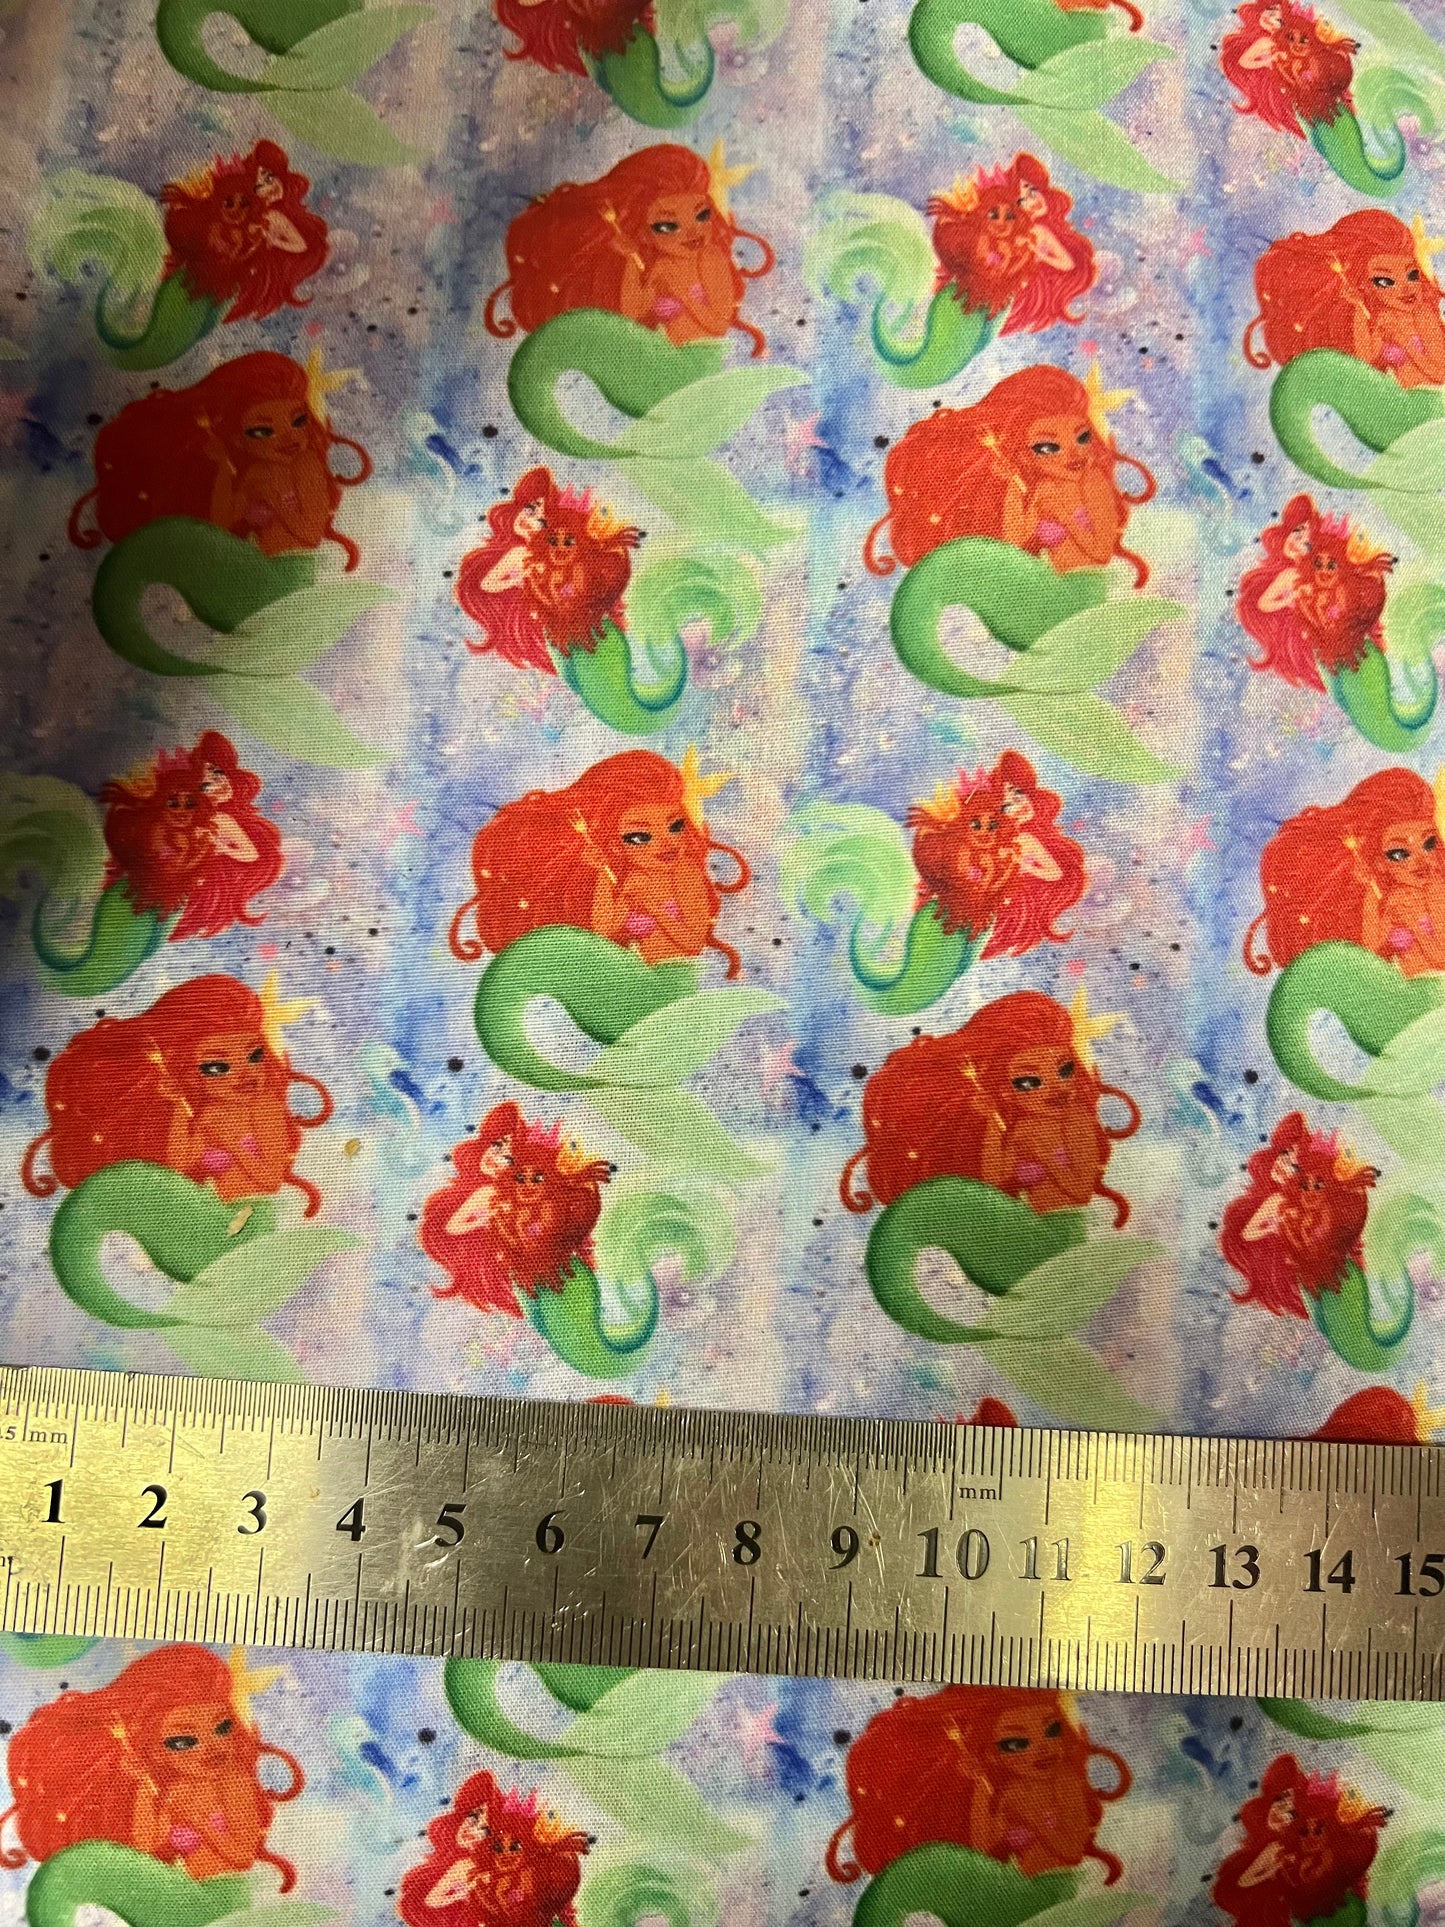 ARIEL LITTLE MERMAID - Polycotton Fabric from Japan